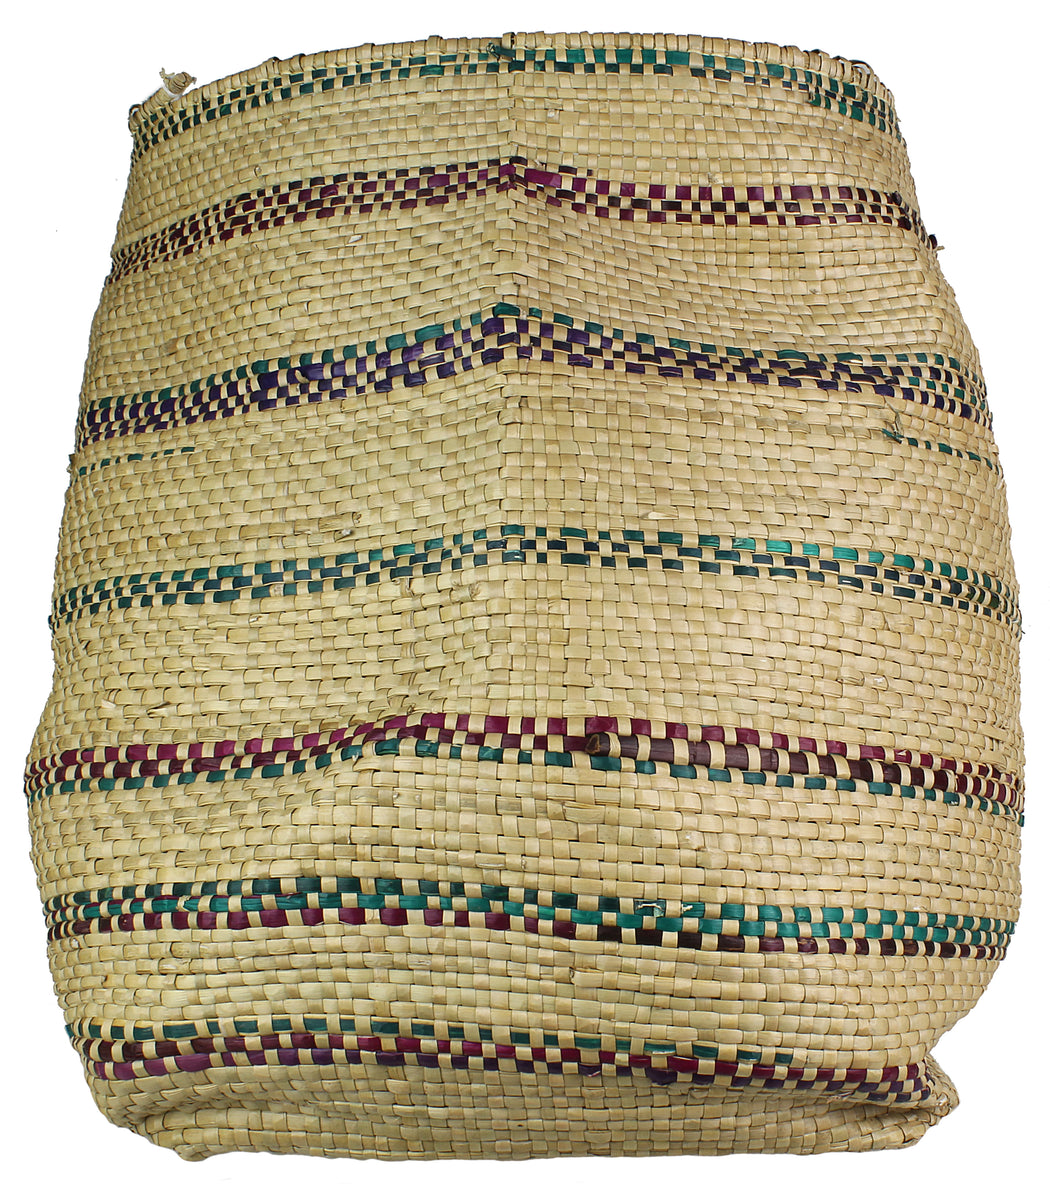 Woven Flexible Tote Style Grass Basket - Niger Bend